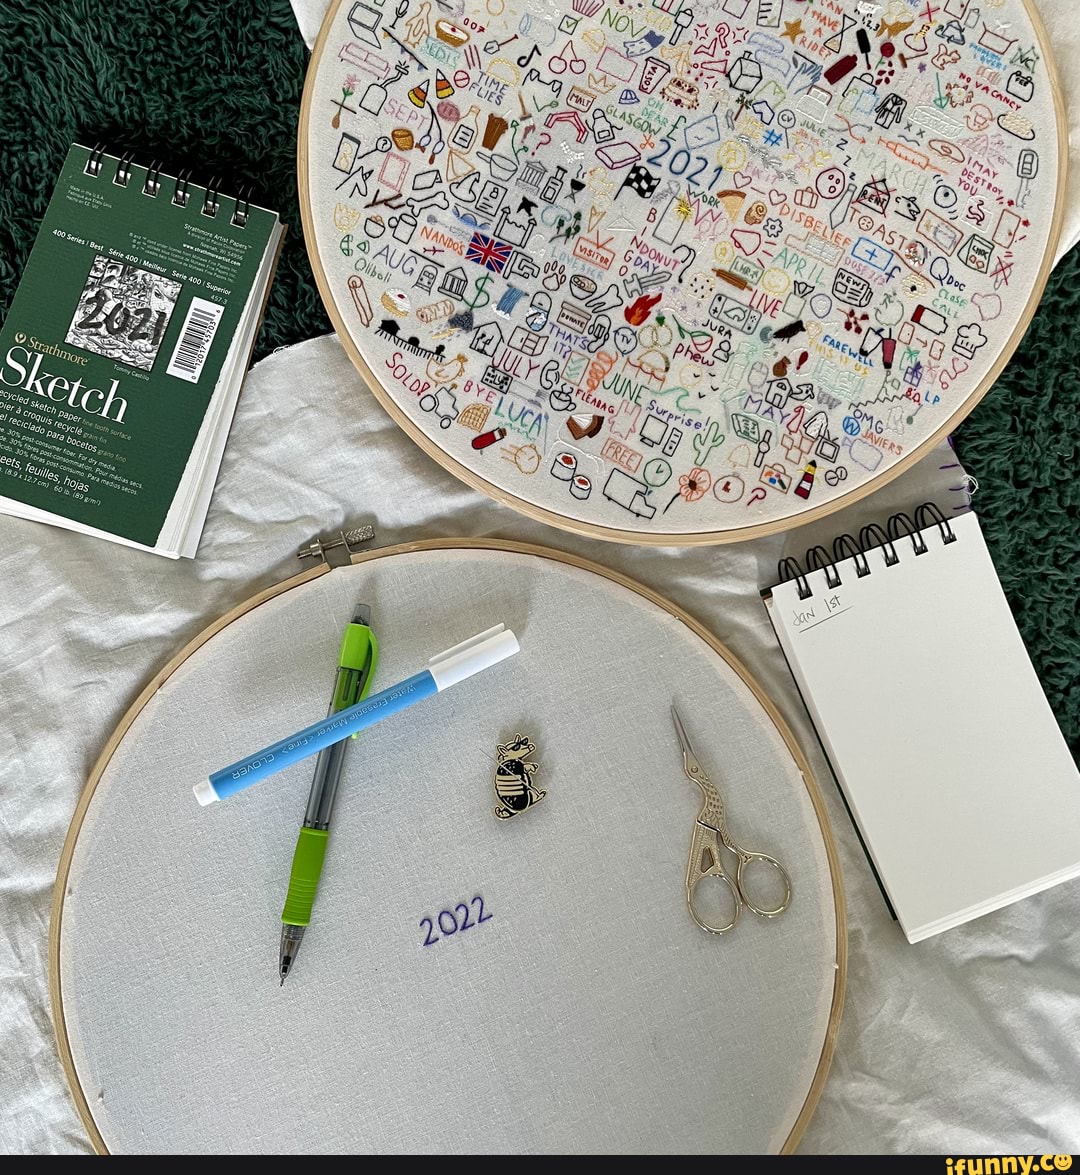 Throughout 2021, I lovingly updated my embroidery journal. All 365